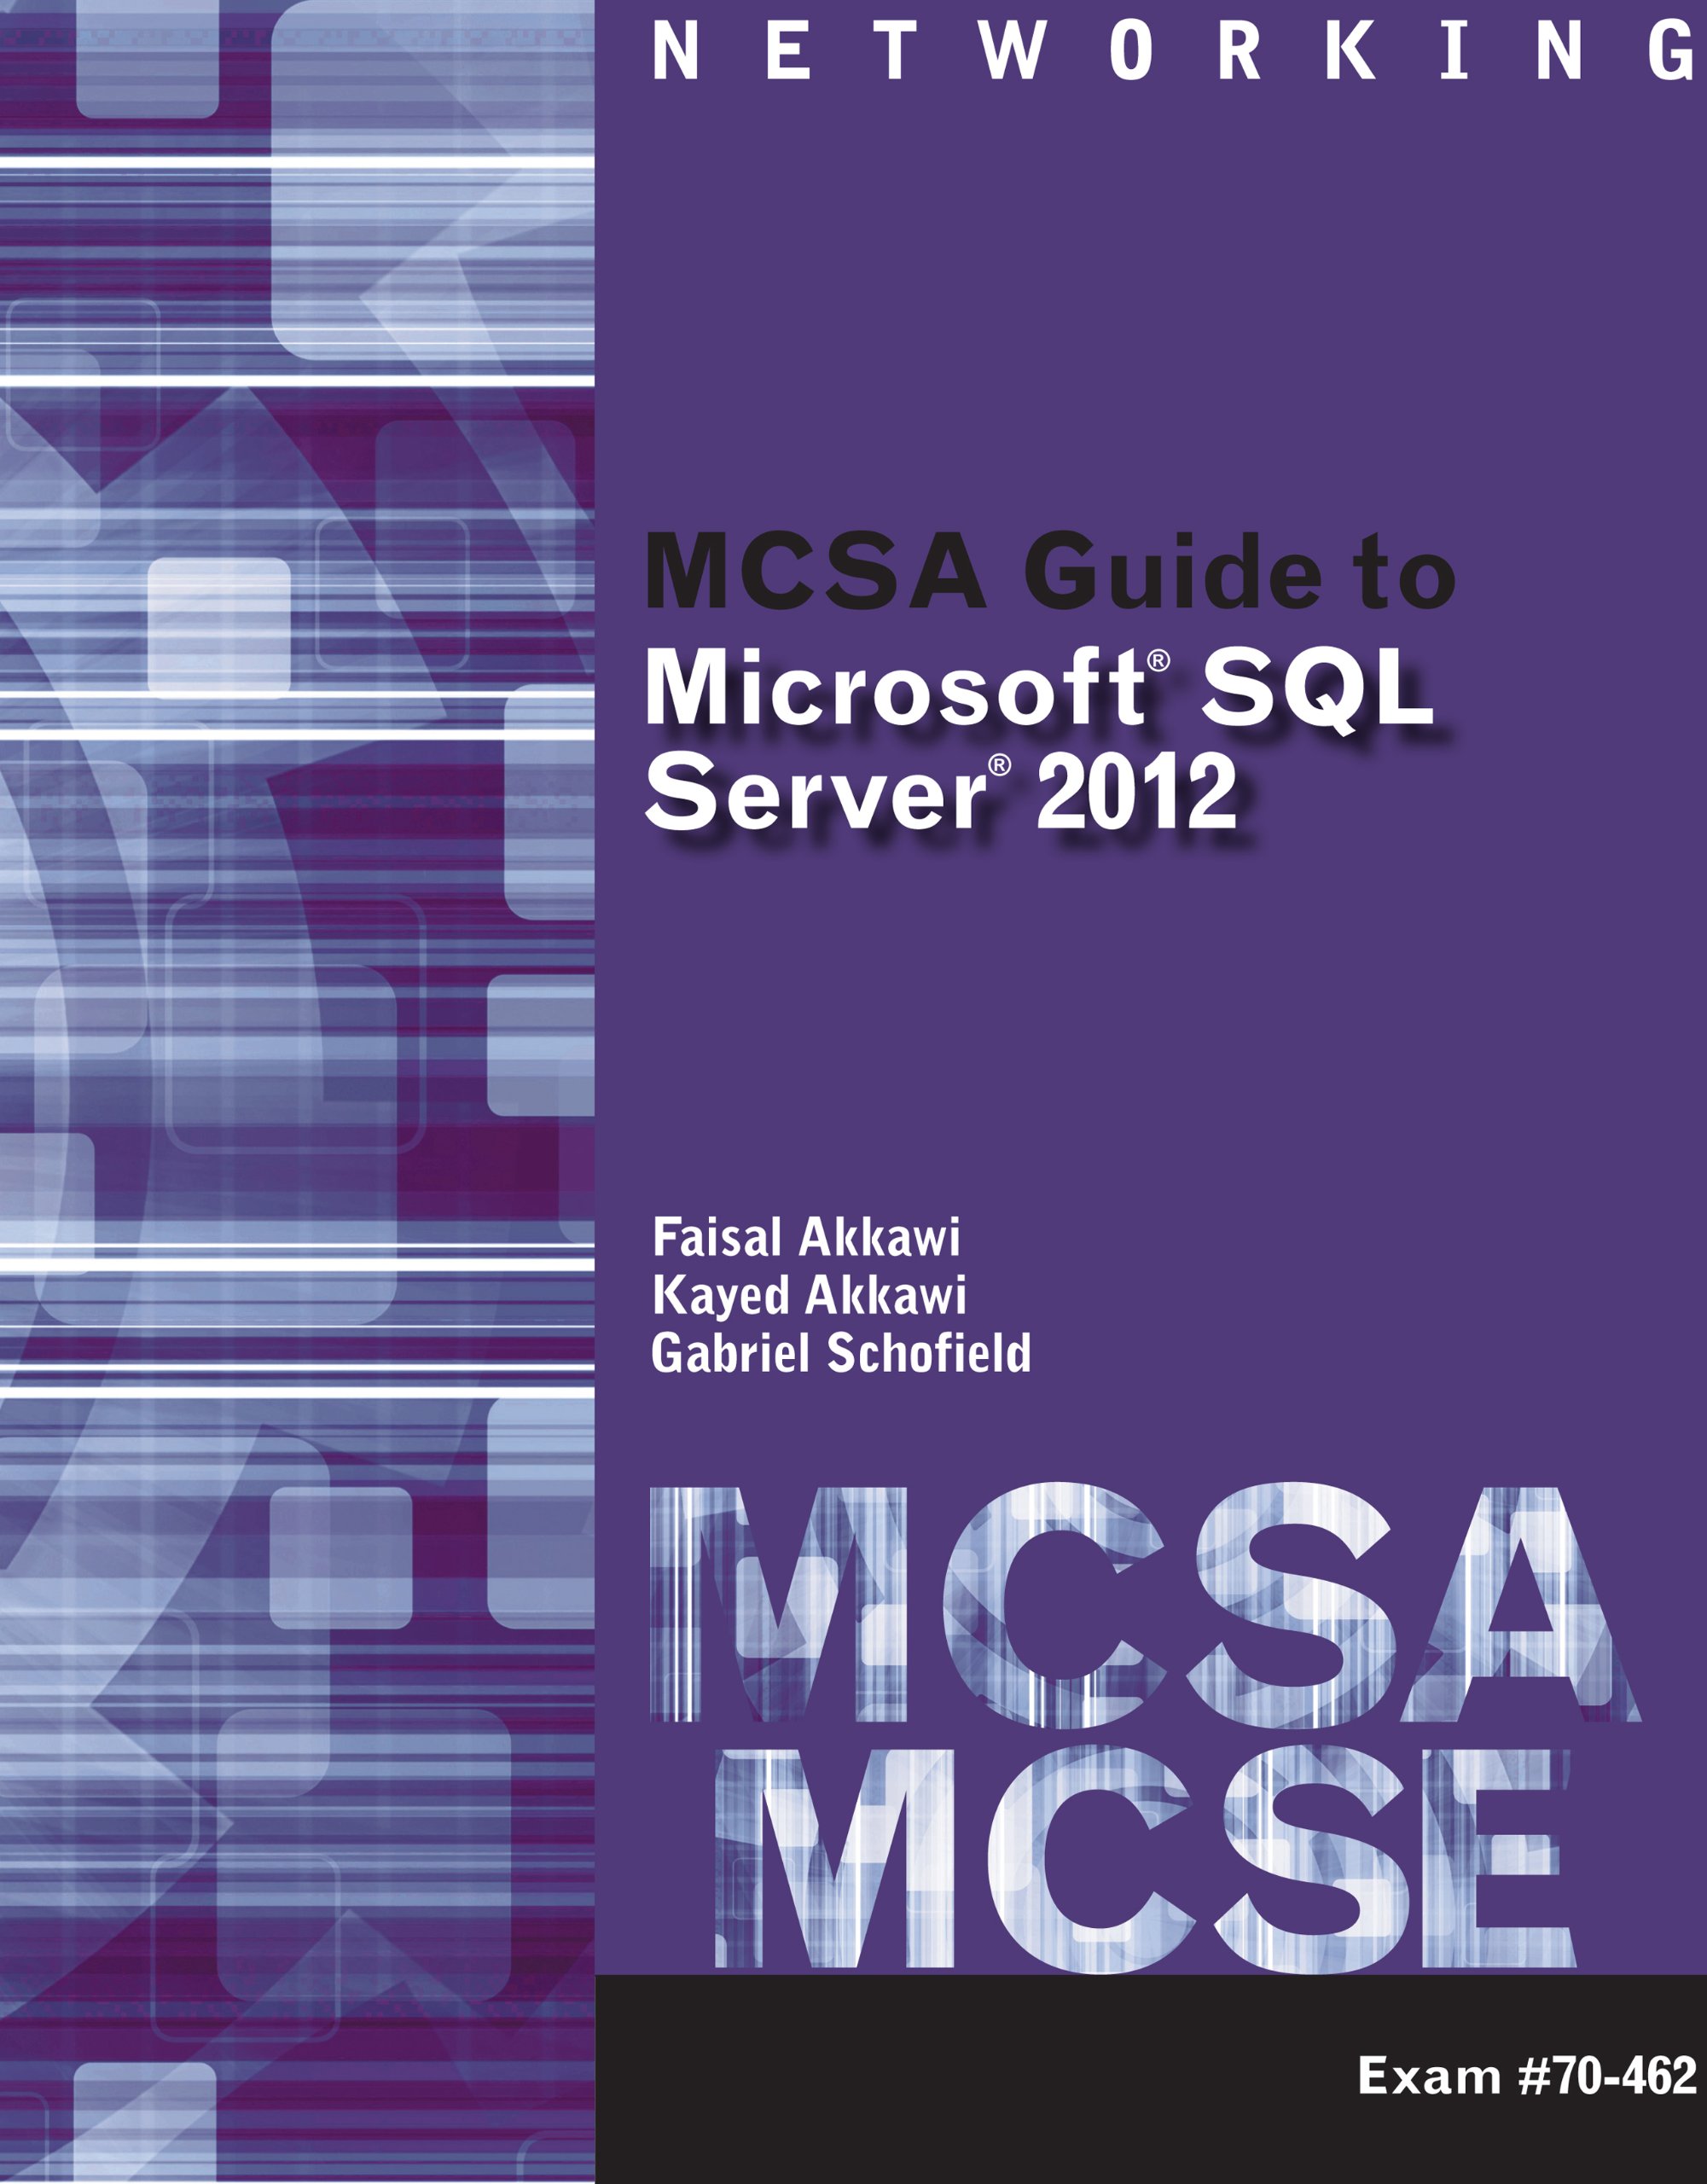 MCSA Guide to Microsoft SQL Server 2012 (Exam 70-462) (Networking (Course Technology))